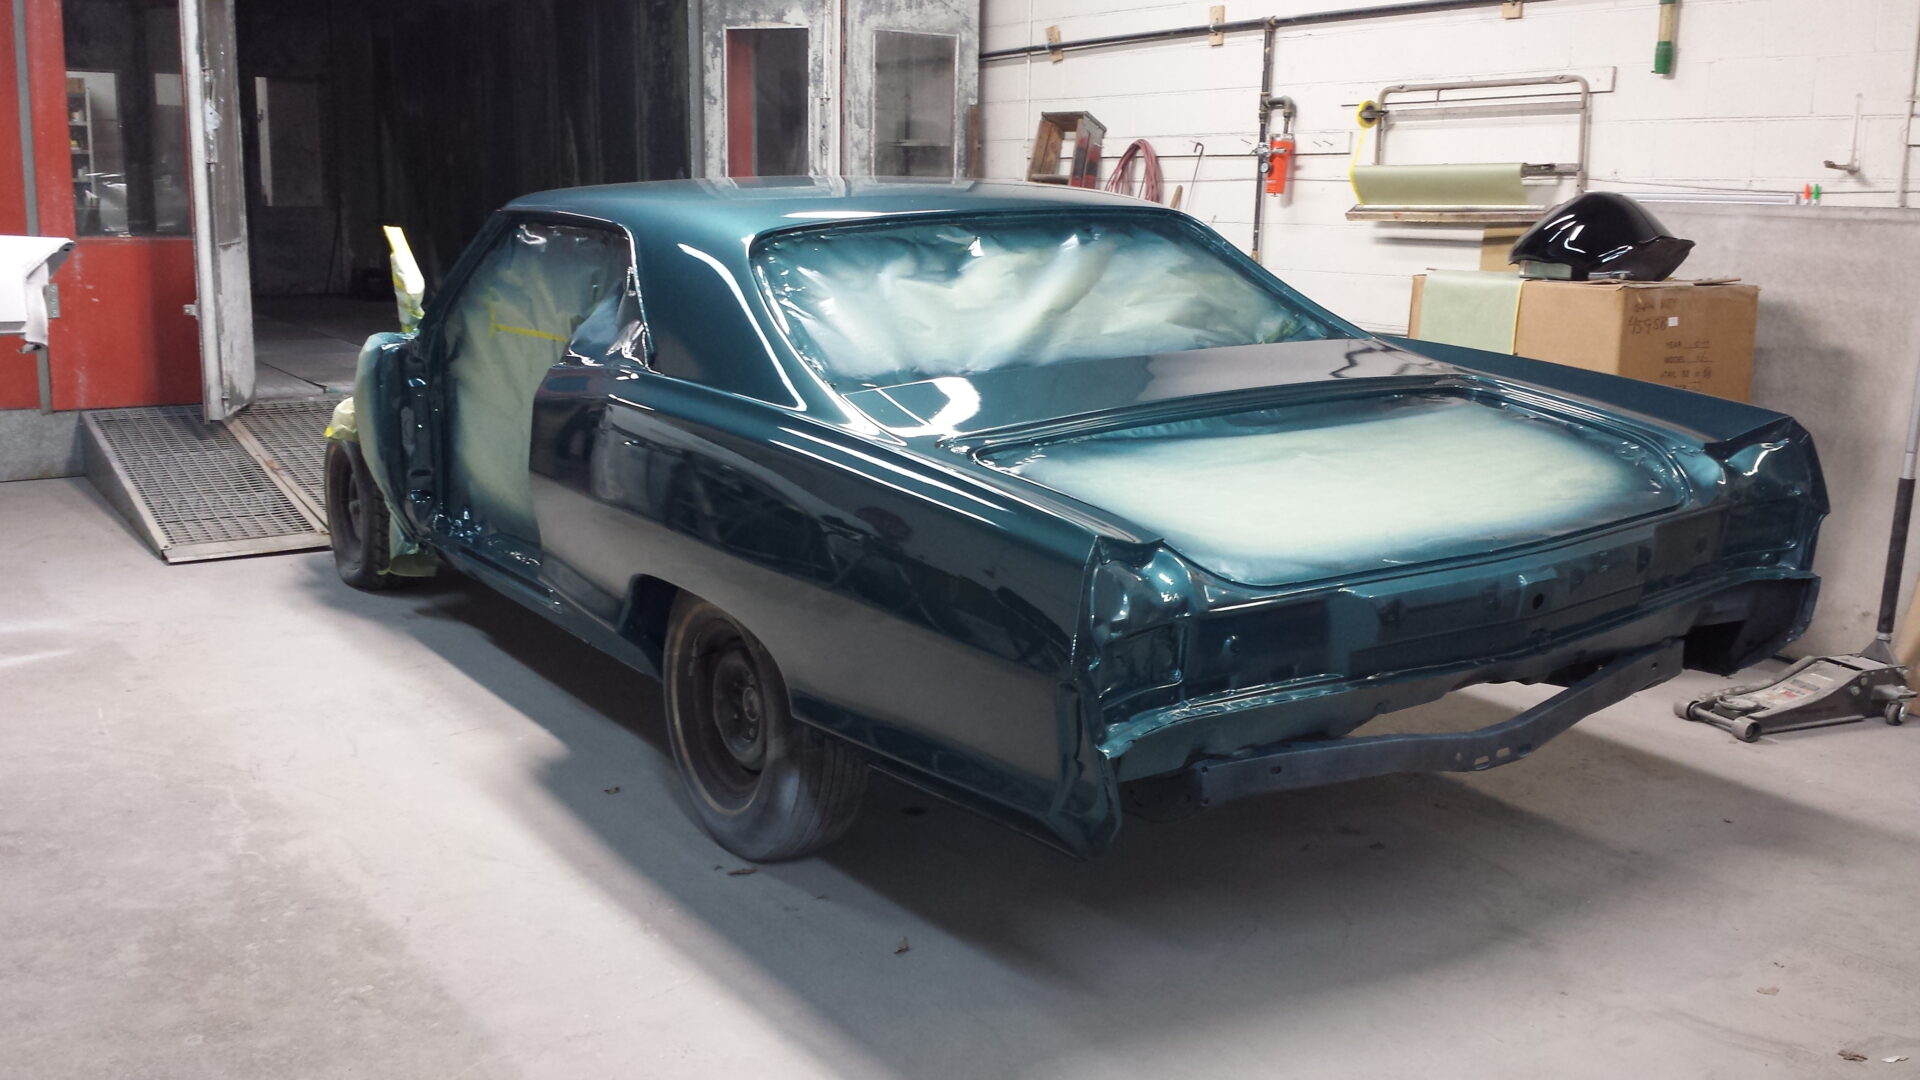 Surface of the 1965 Pontiac Grand Prix painted in blue green